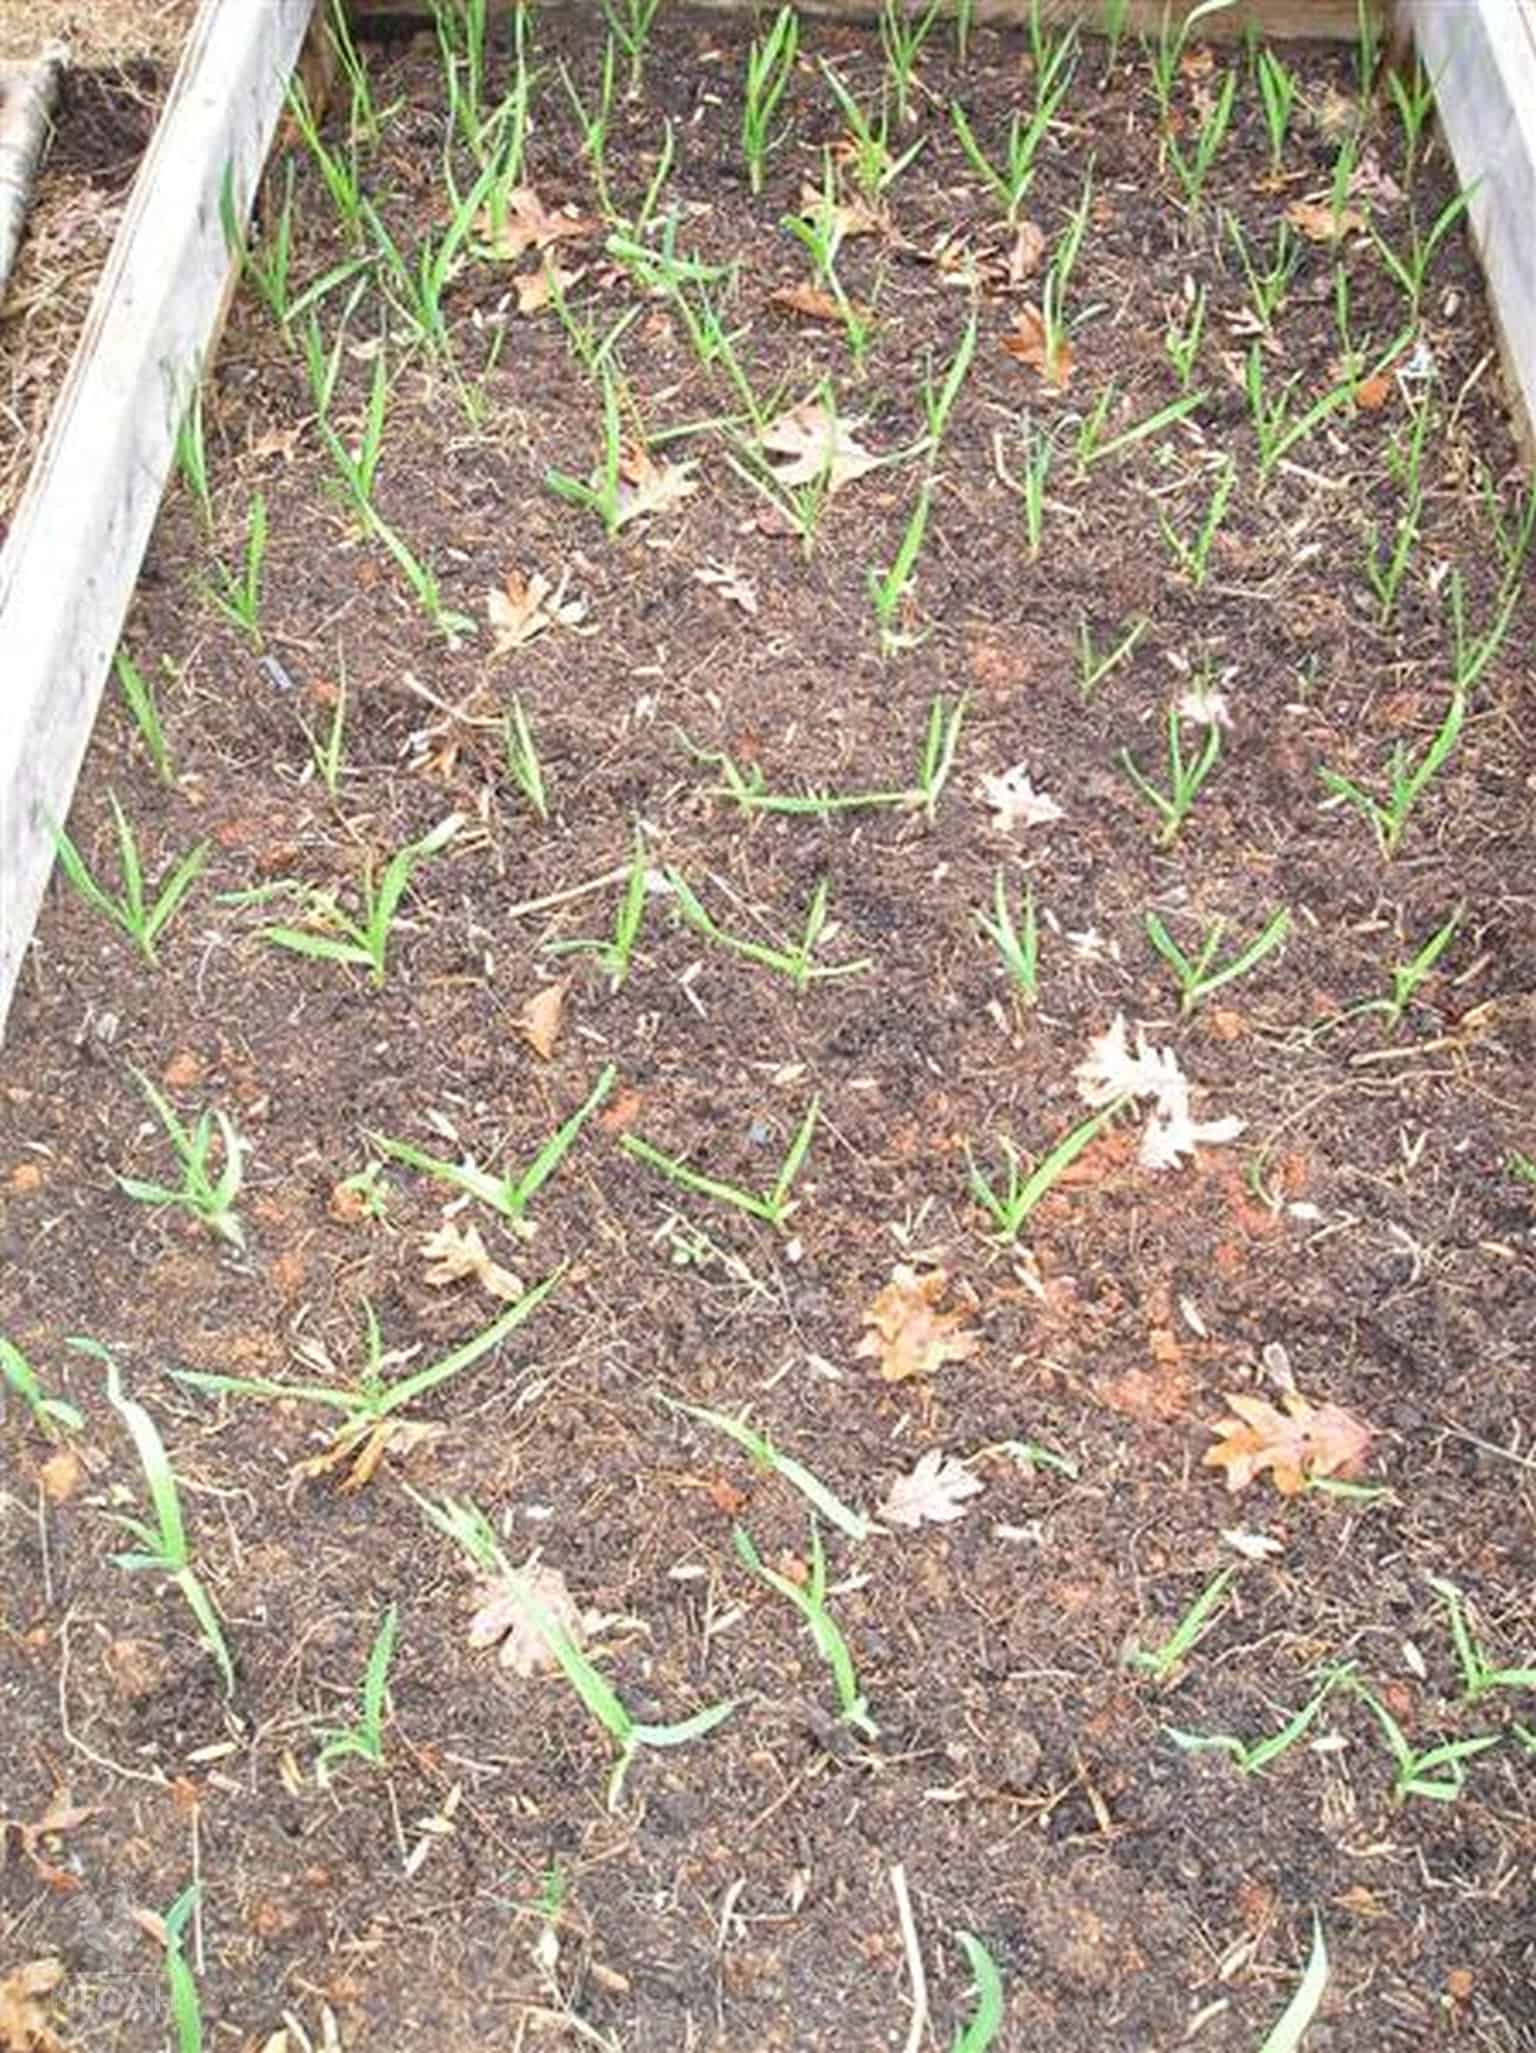 planted store-bought garlic growing in raised bed